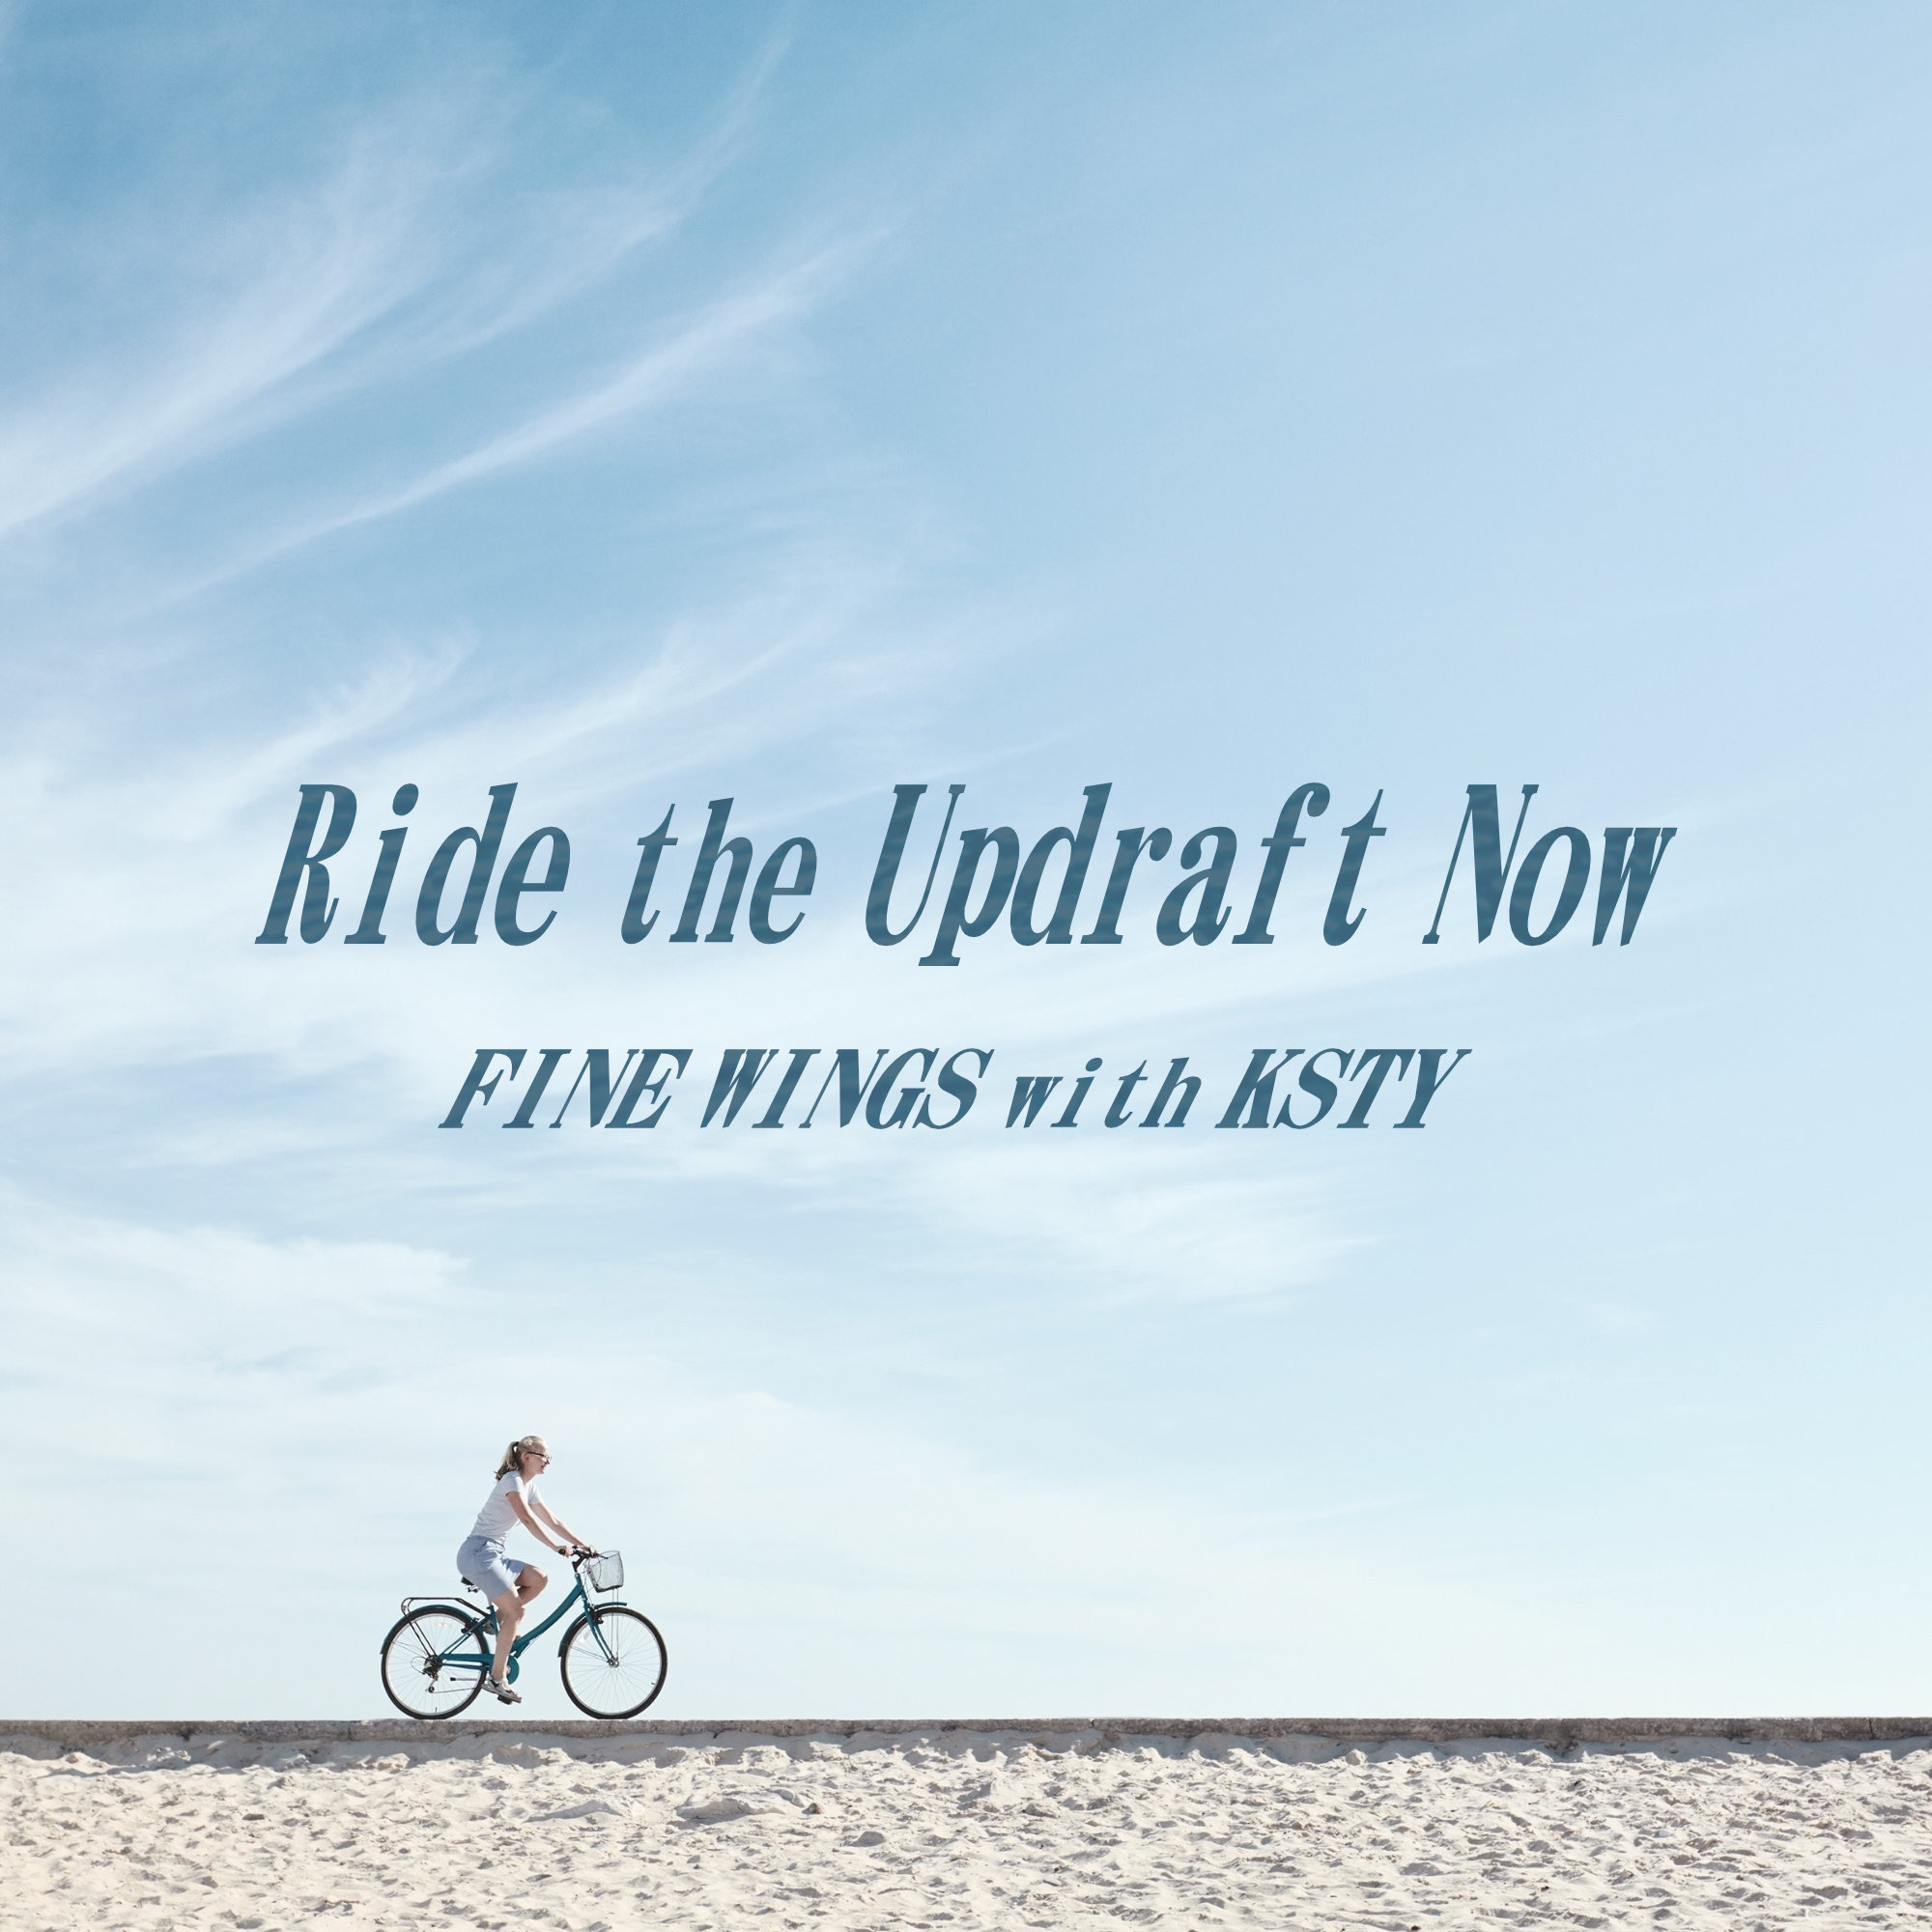 Ride the Updraft Now アートワーク